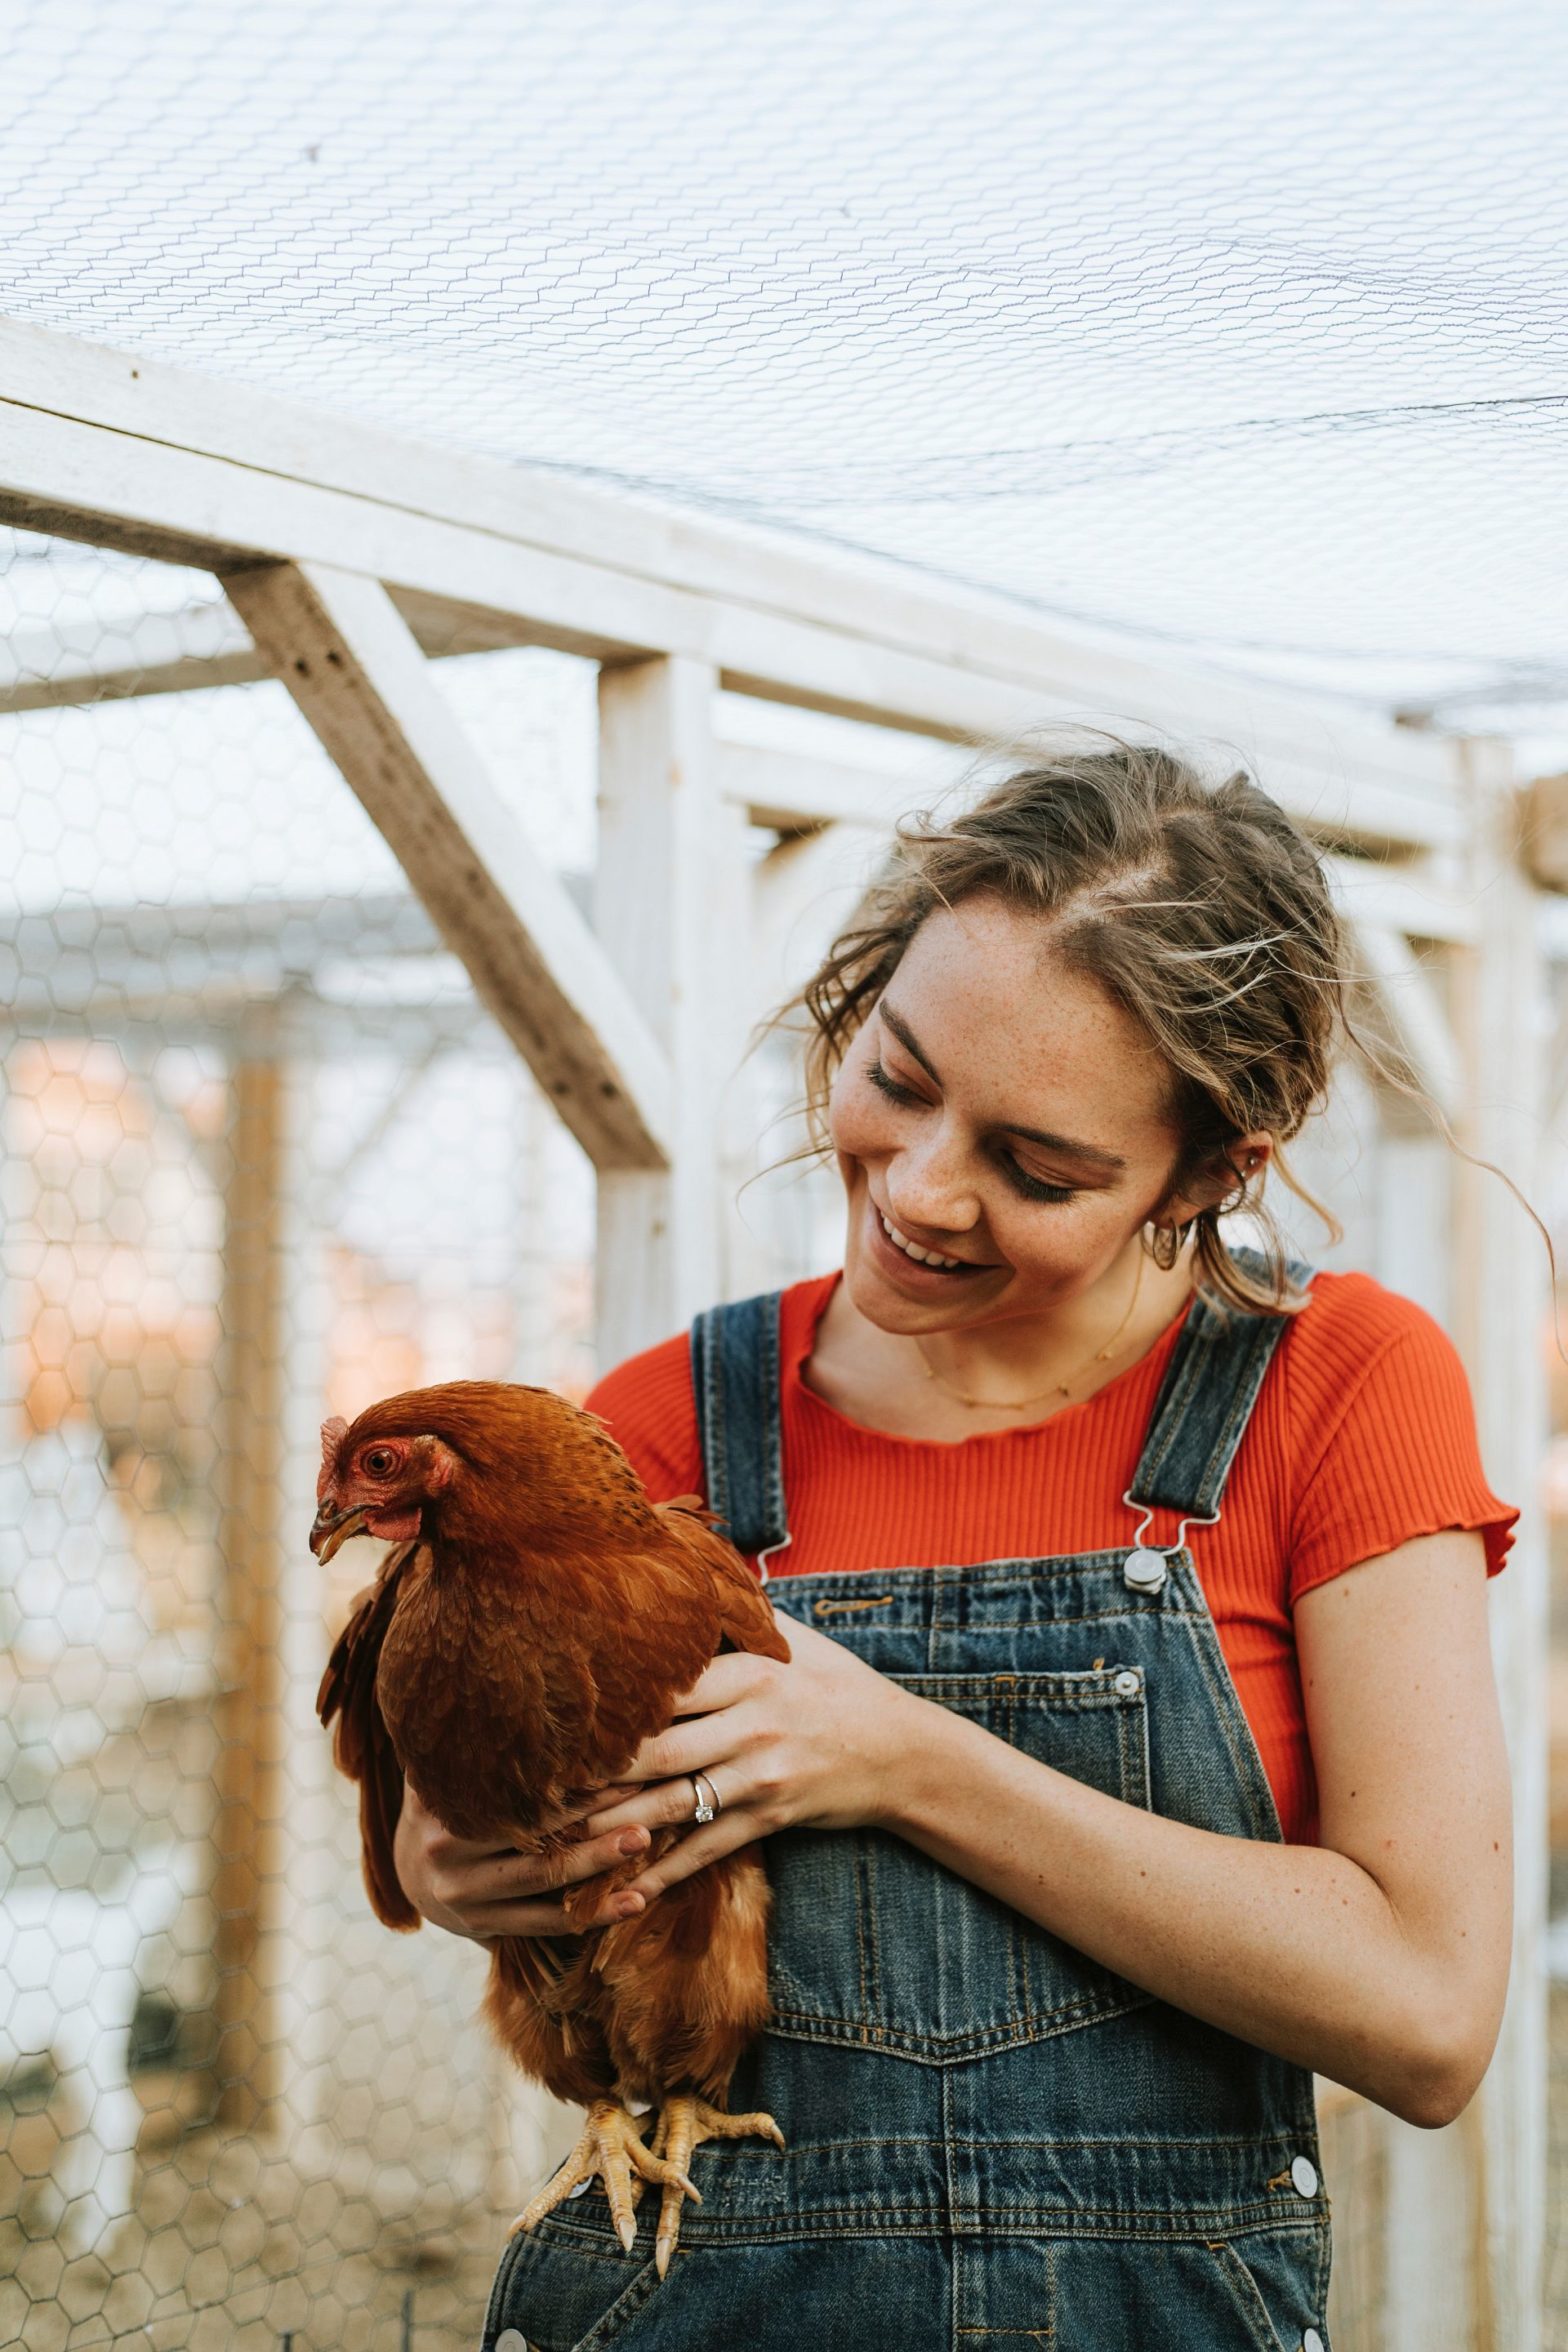 A woman in a red shirt and overalls holding a chicken